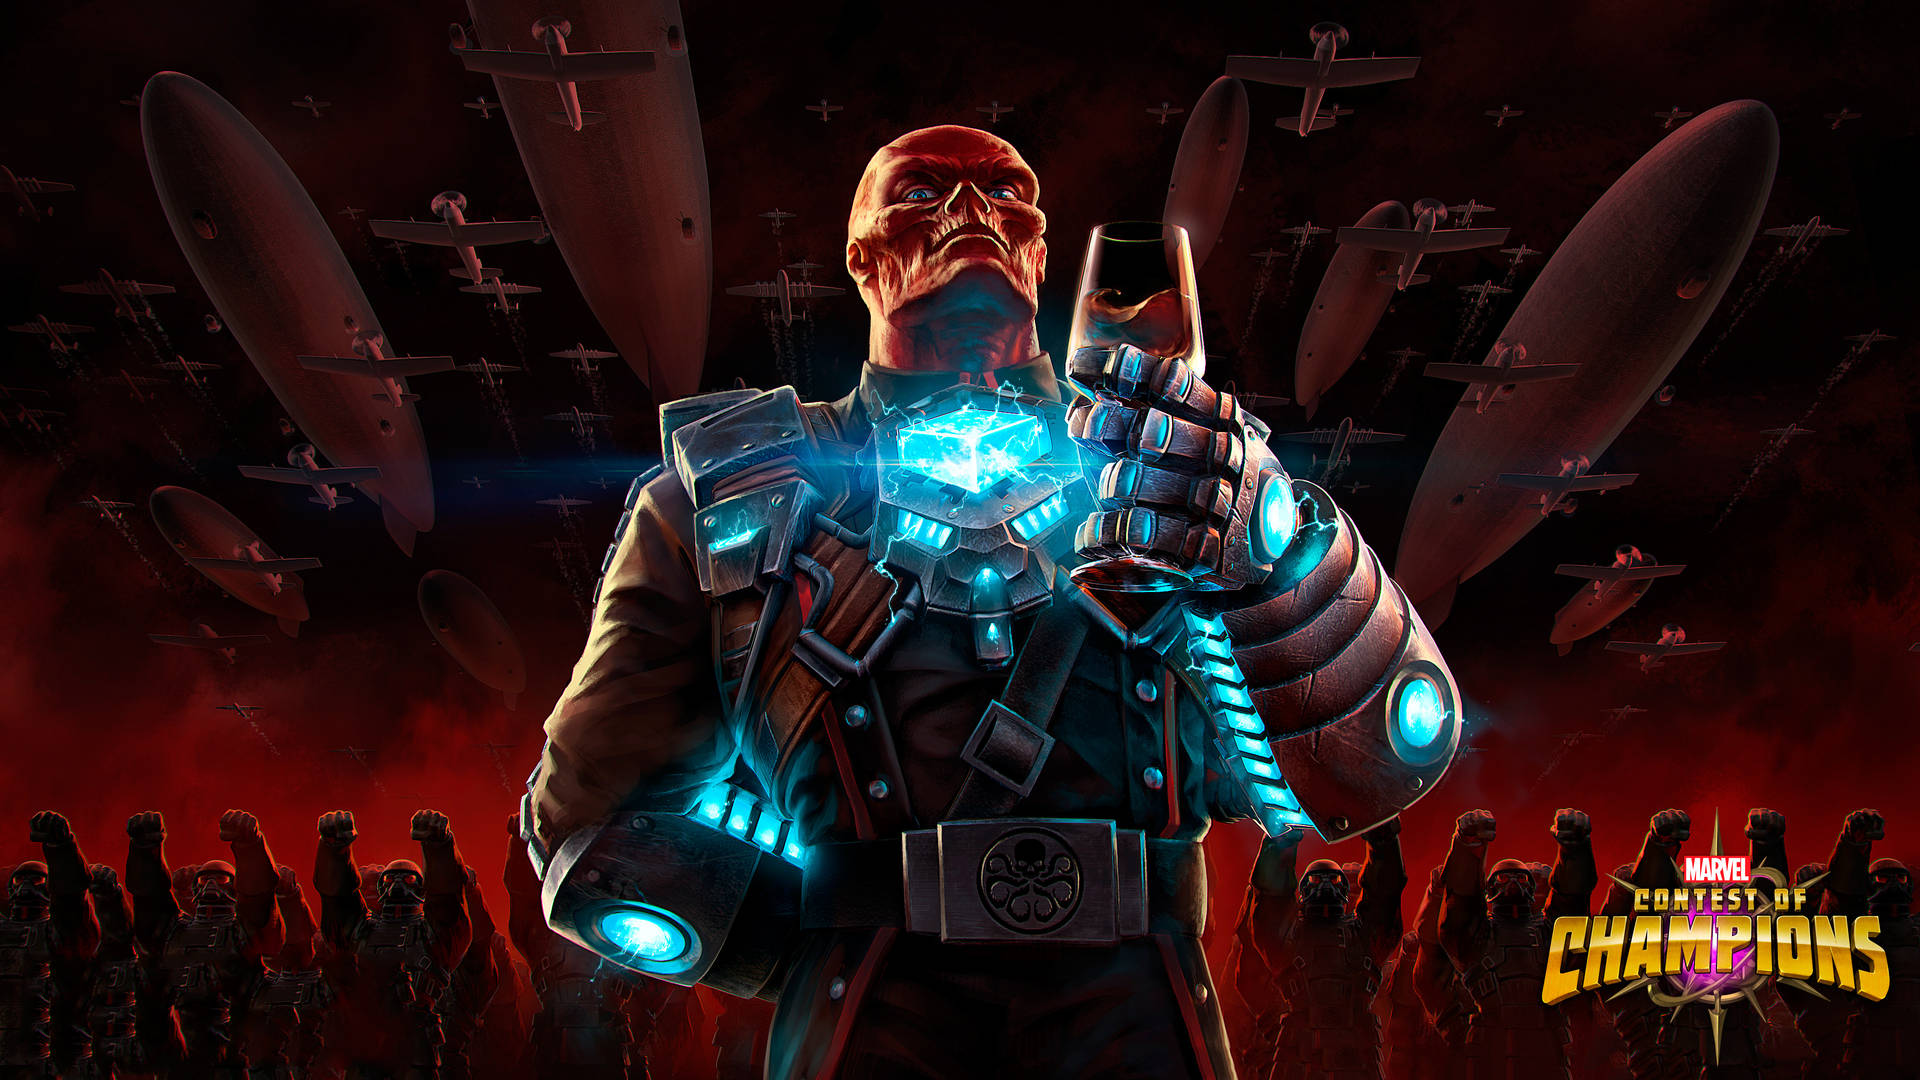 Red Skull Contest Of Champions